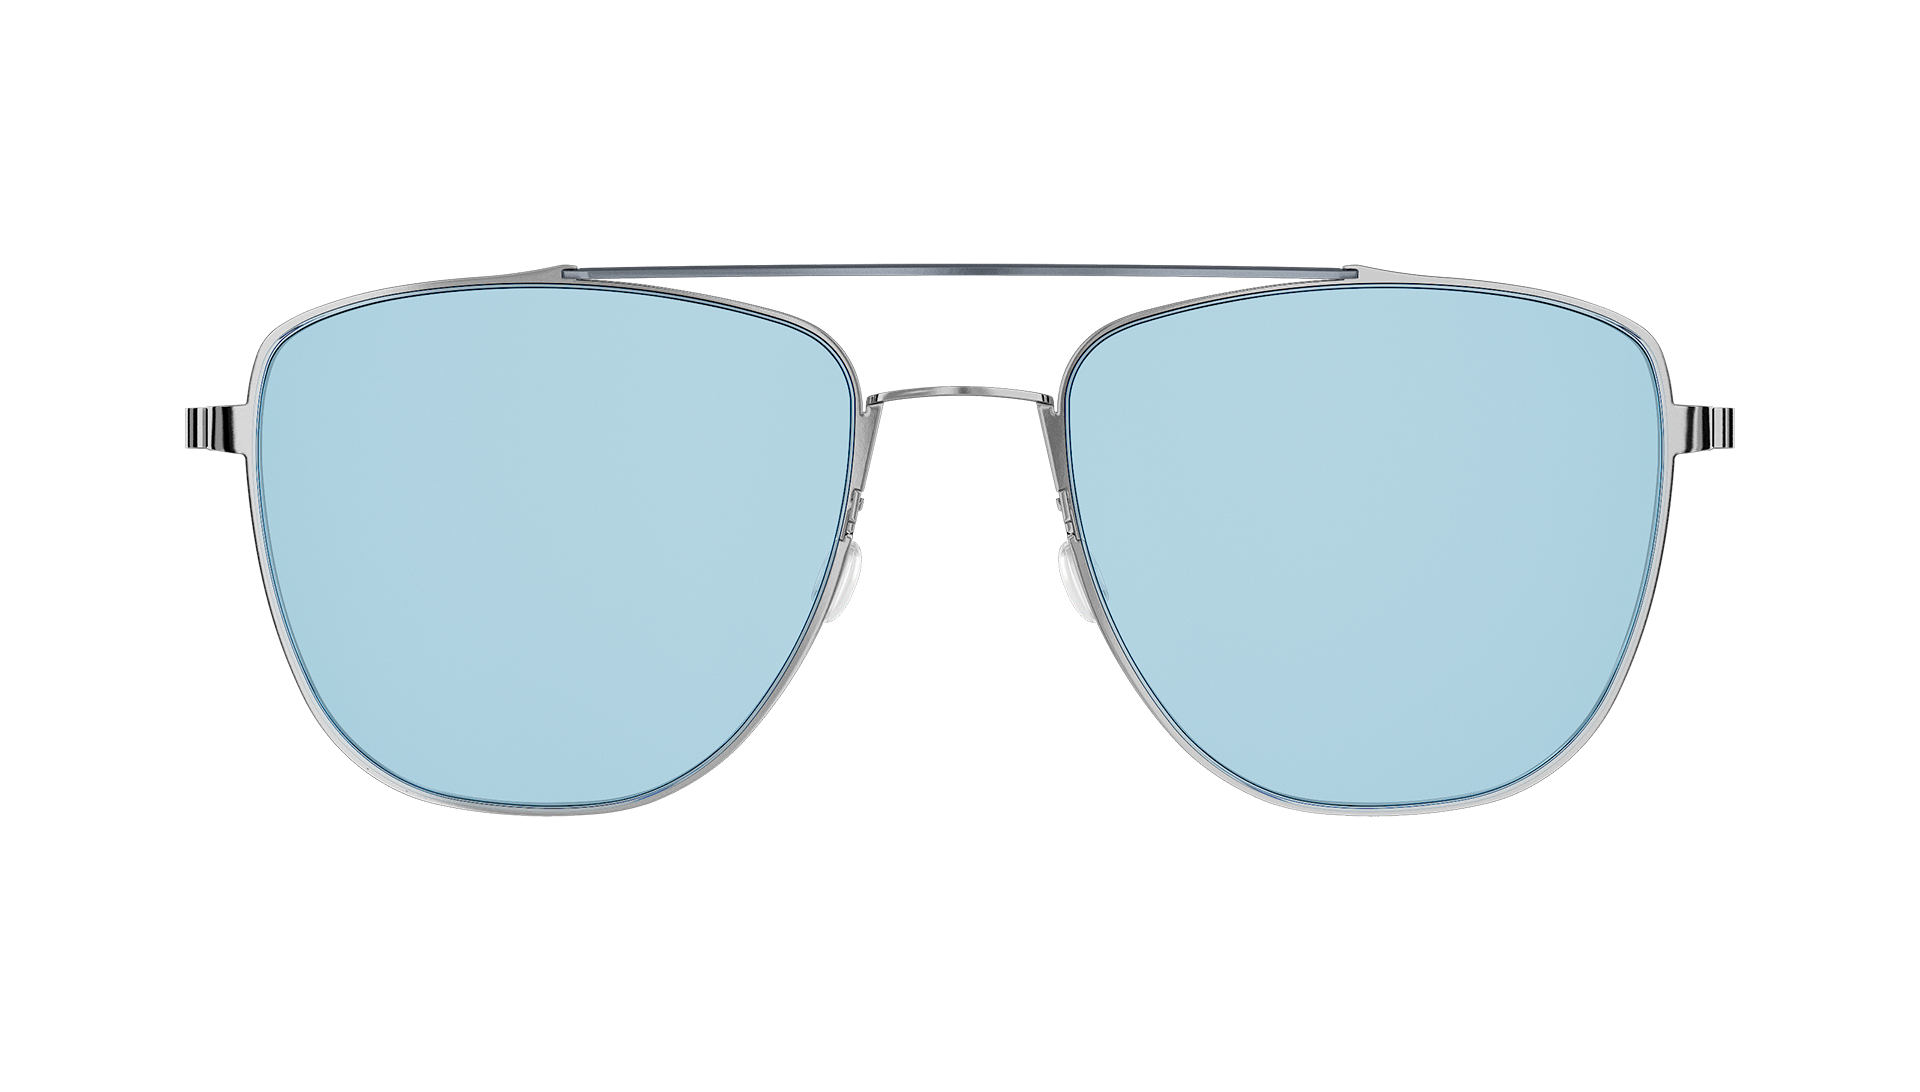 LINDBERG Model 8910 double bar silver sunglasses with blue tinted lenses